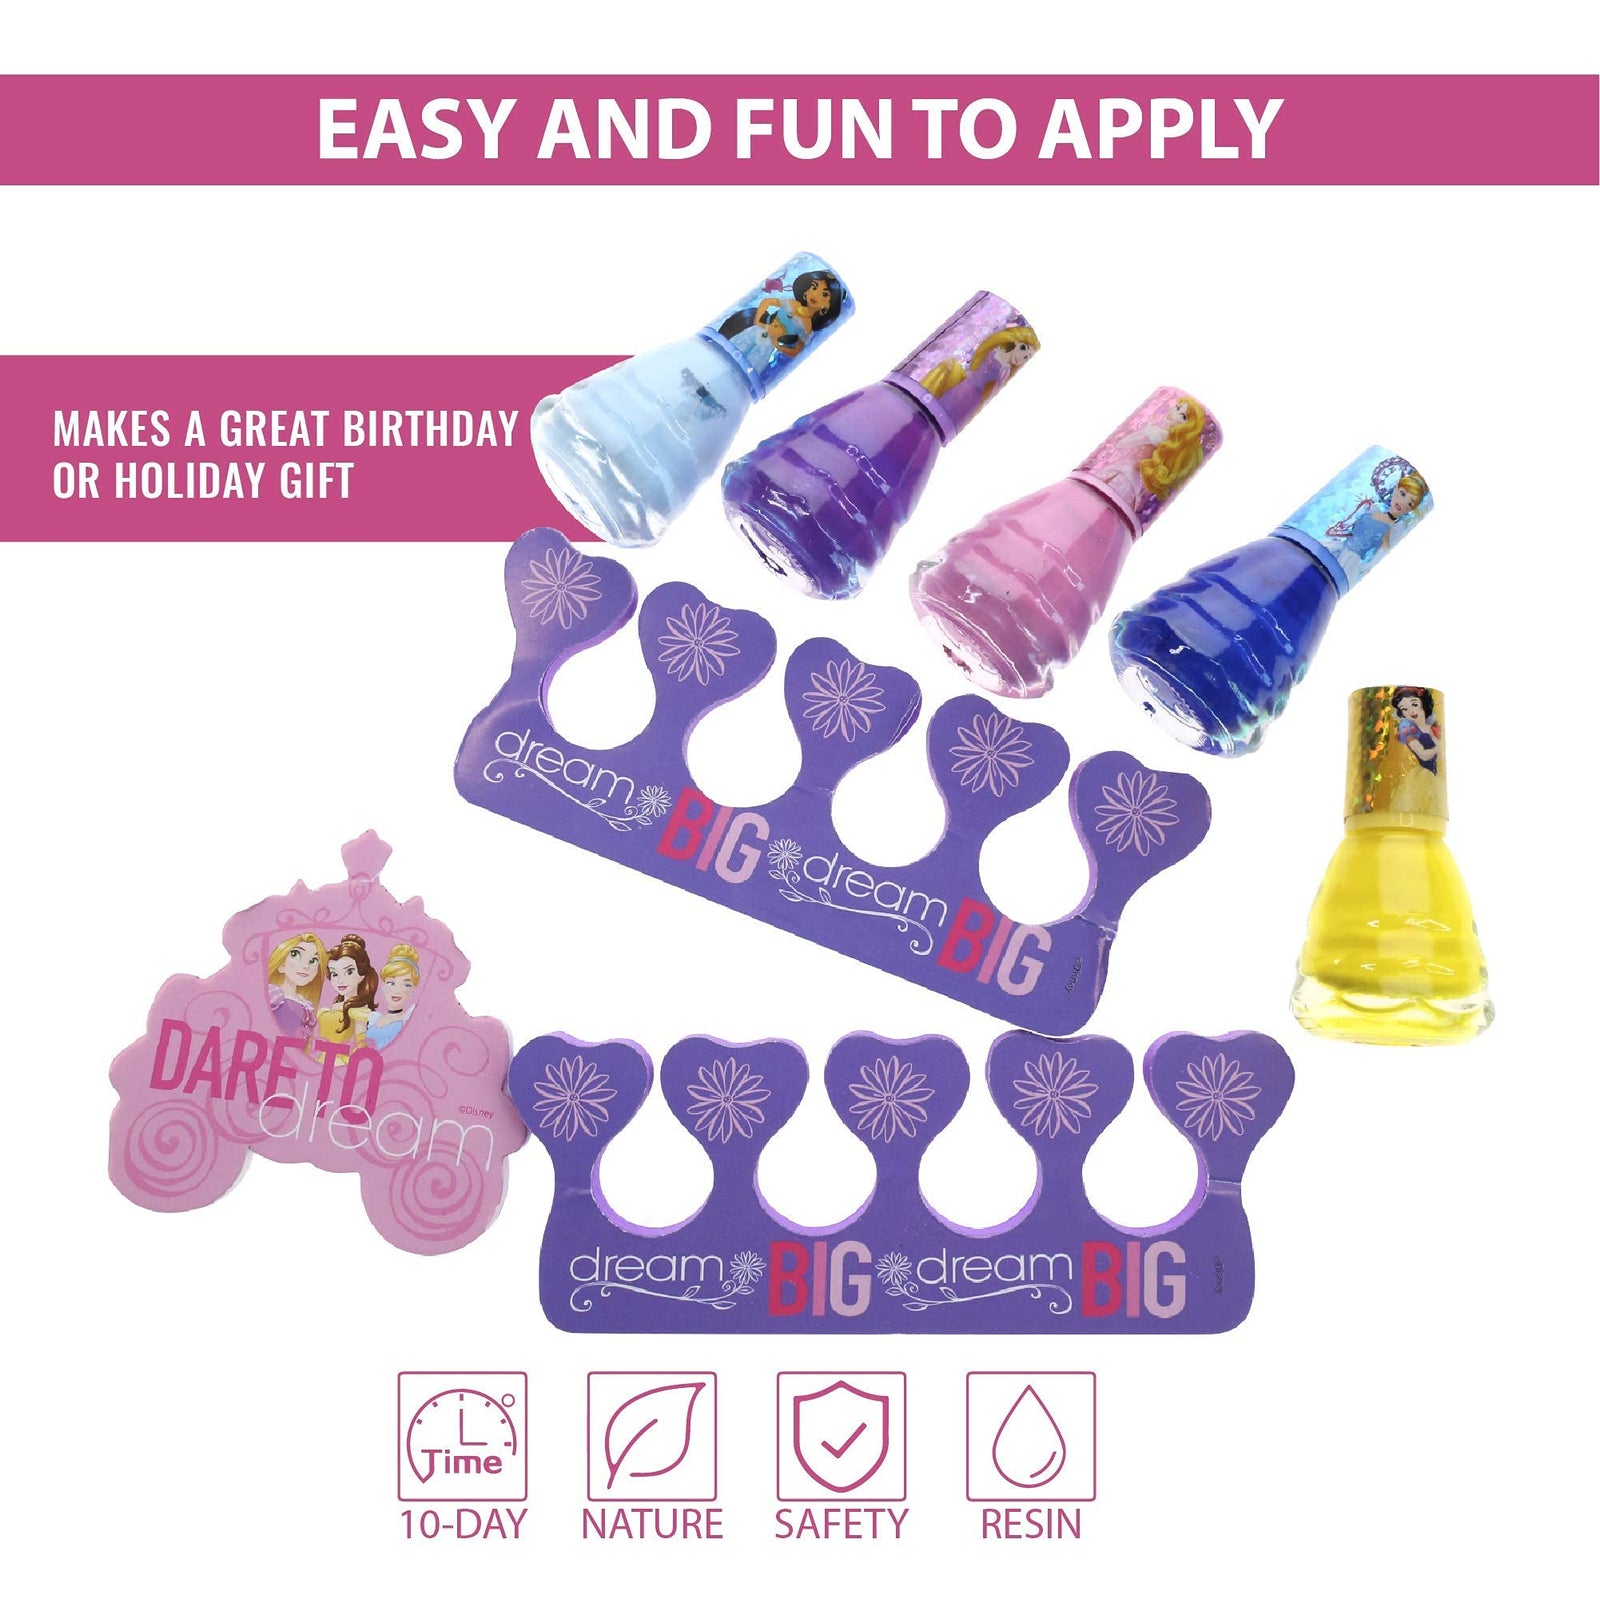 Disney Princess - Townley Girl Non-Toxic Peel-Off Water-Based Natural Safe Quick Dry Nail Polish| Gift Kit Set for Kids Toddlers Girls| Glittery and Opaque Colors| Ages 3+ (18 Pcs)